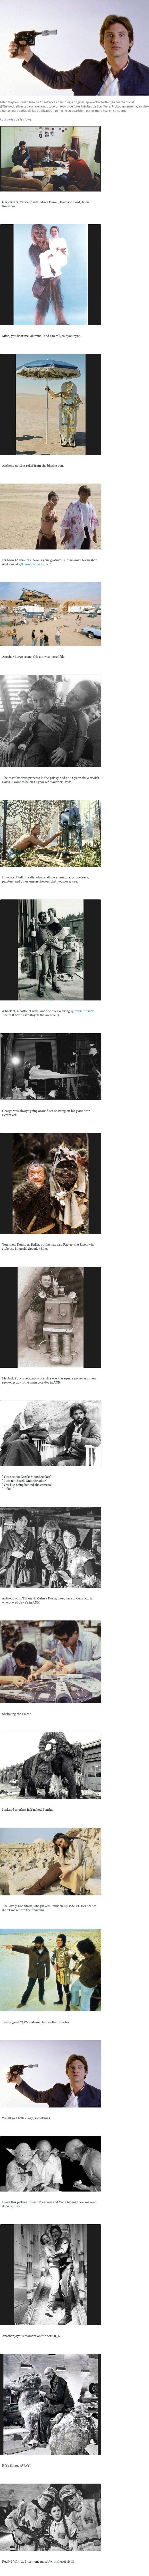 Unpublished #photos of #StarWars: Peter Mayhew, #Chewbacca, reveals the Set phot